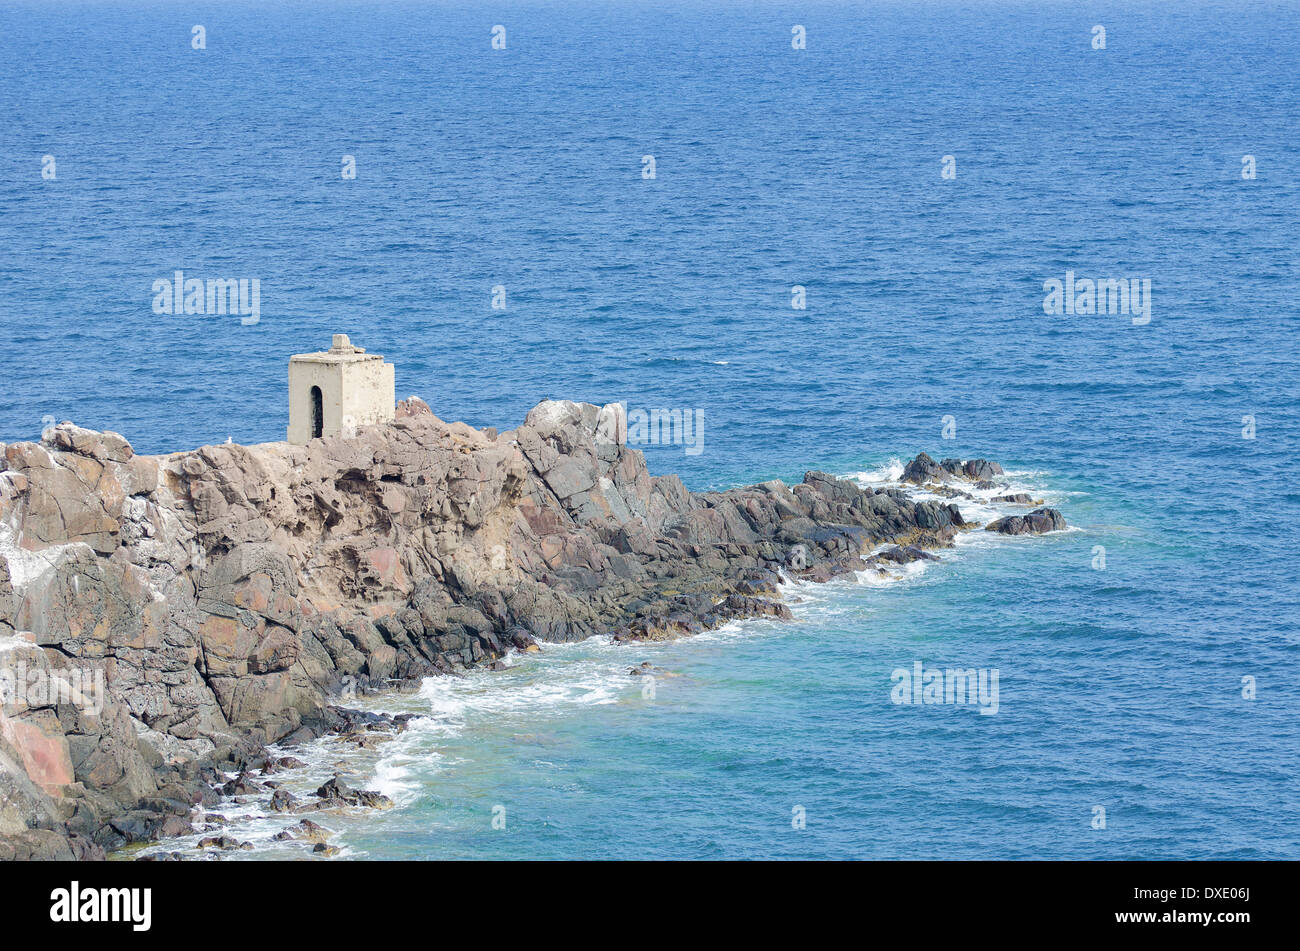 Mountain cliff stretching under water. Stock Photo